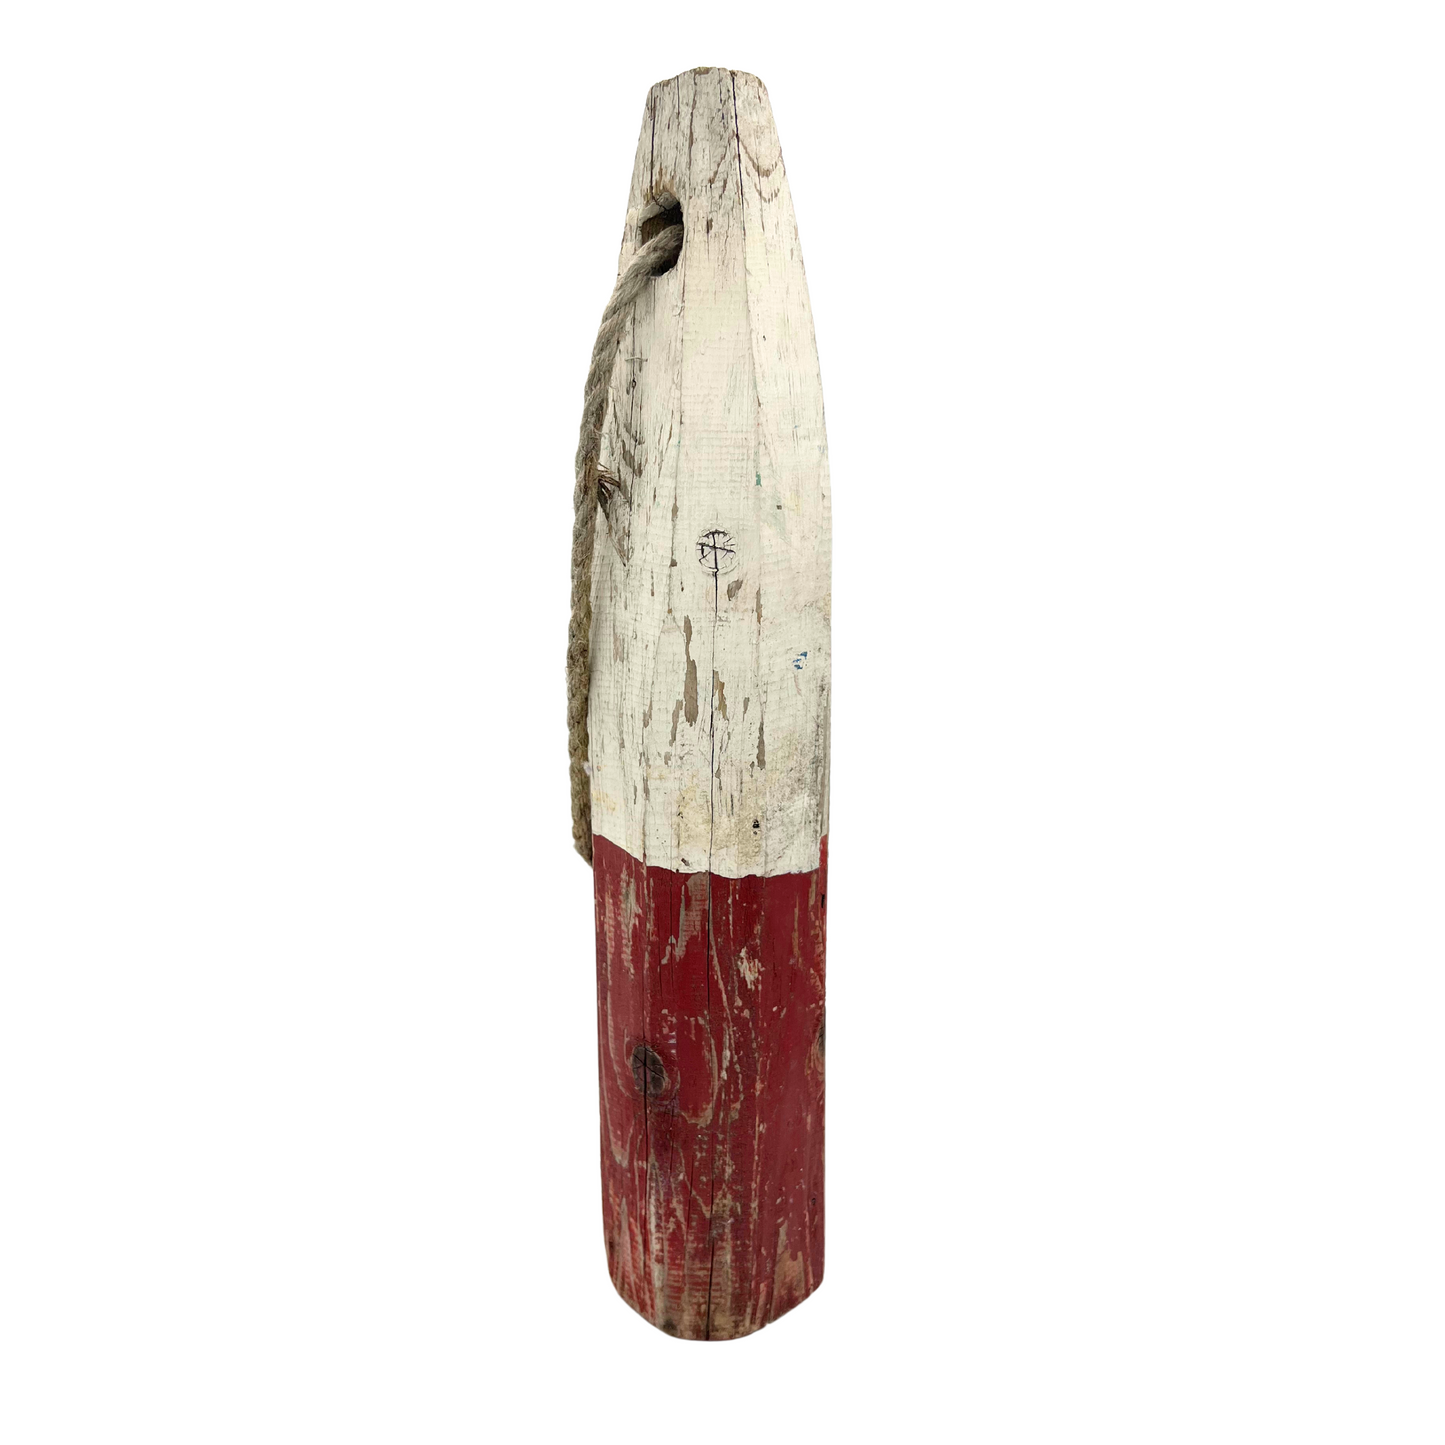 authentic red and white wooden buoy